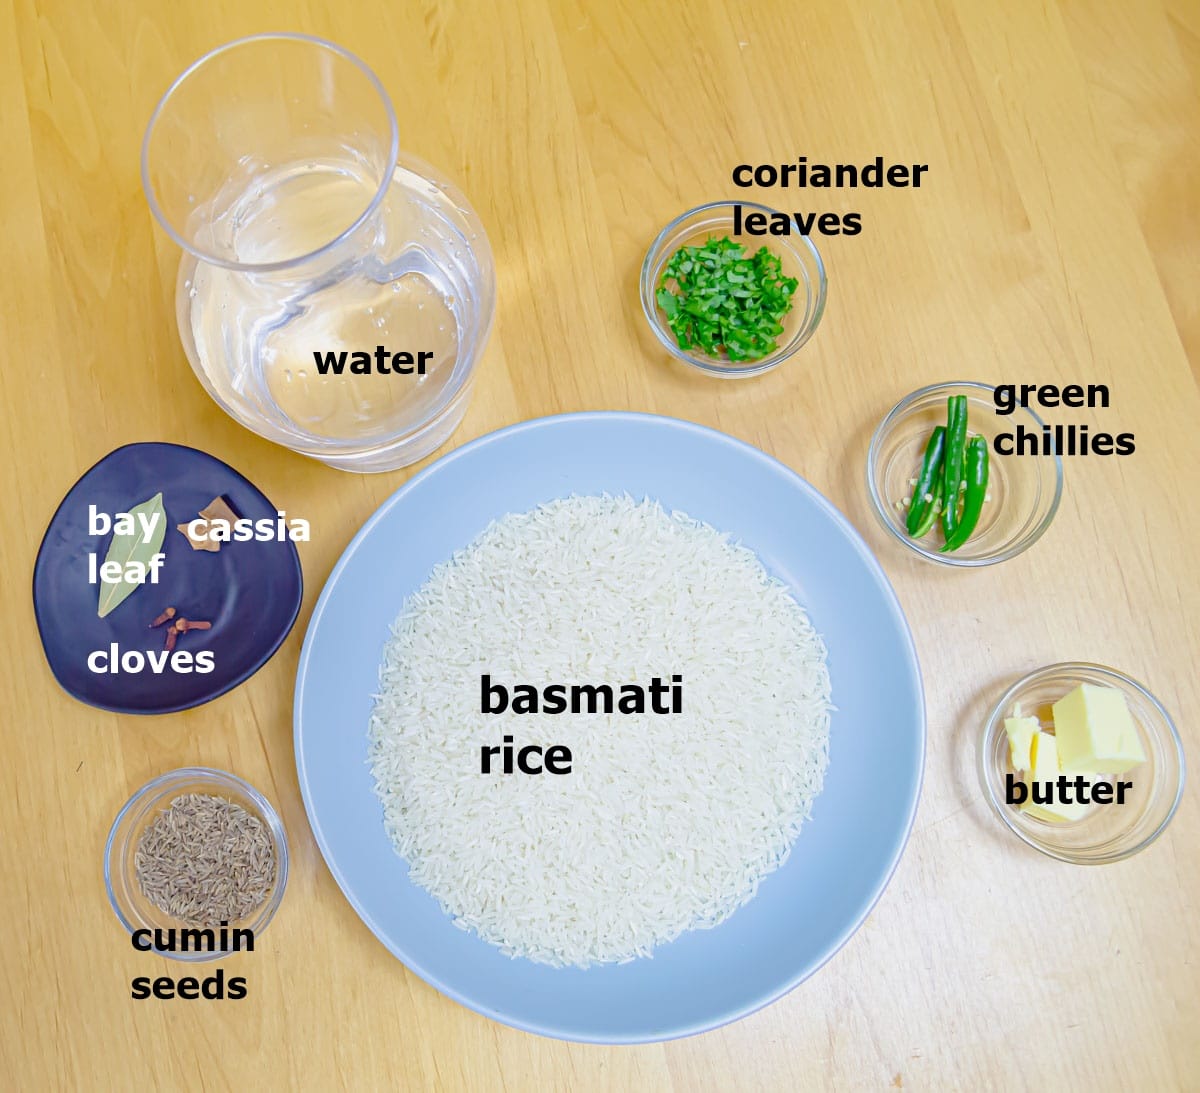 basmati rice, whole spices, water, butter, green chillies and coriander placed on a wooden table.